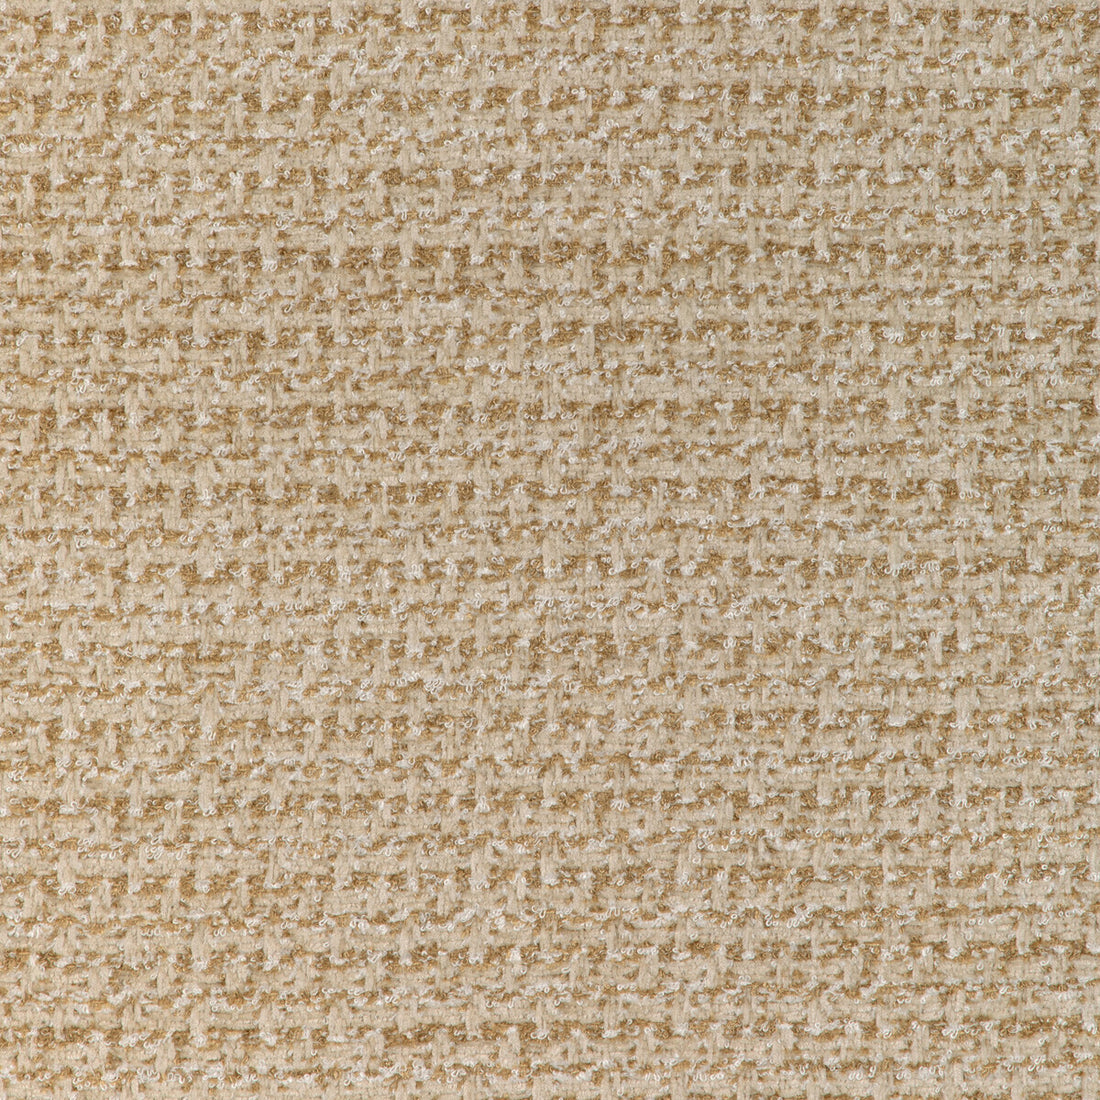 Nivolet Texture fabric in gold color - pattern 8023154.416.0 - by Brunschwig &amp; Fils in the Chambery Textures IV collection